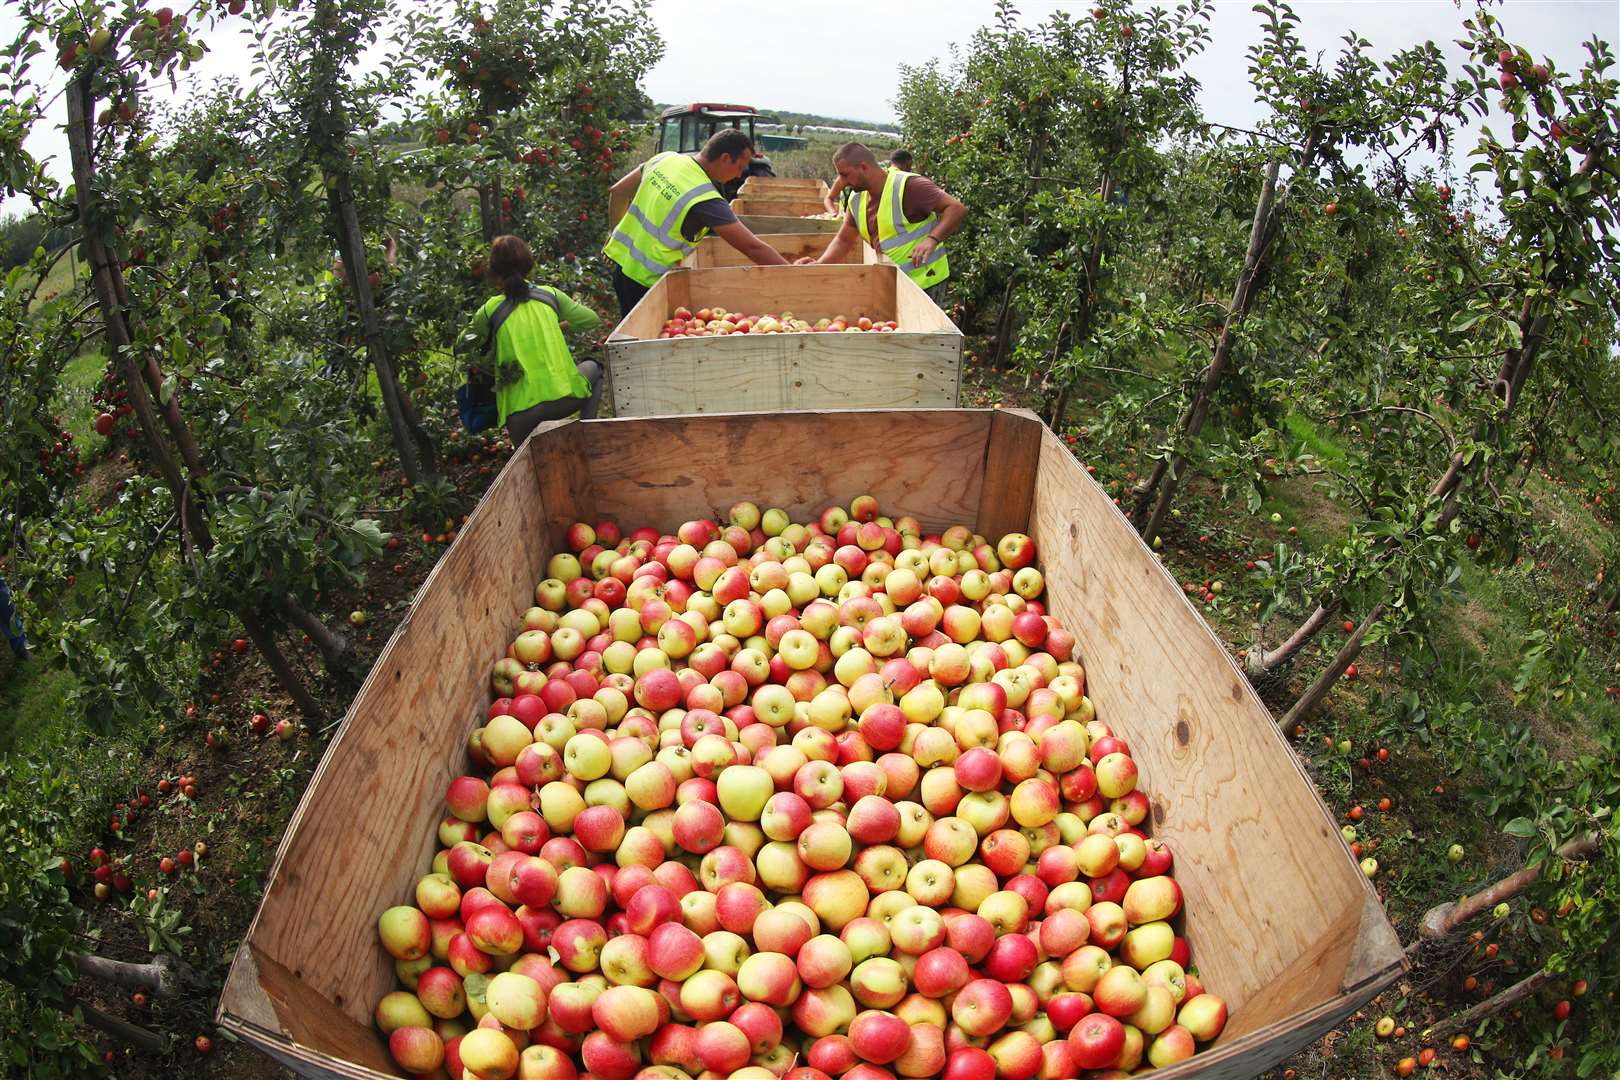 The heatwave generated a bumper crop of apples last year